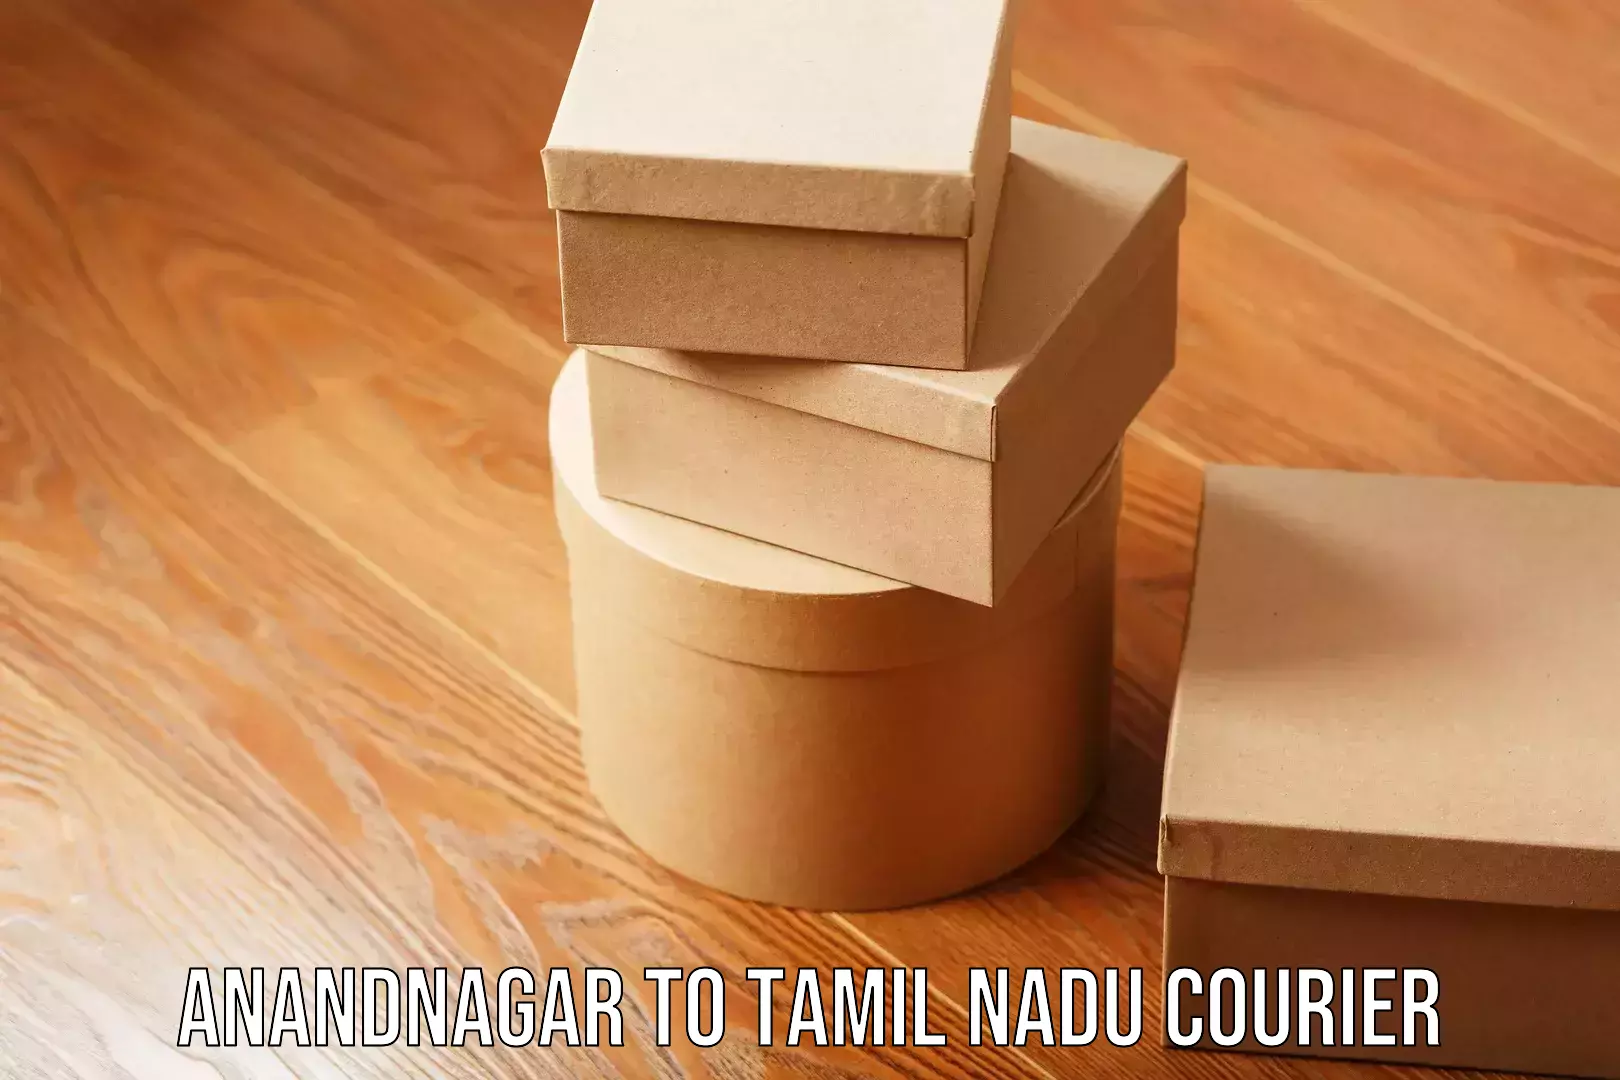 Professional delivery solutions Anandnagar to Tamil Nadu